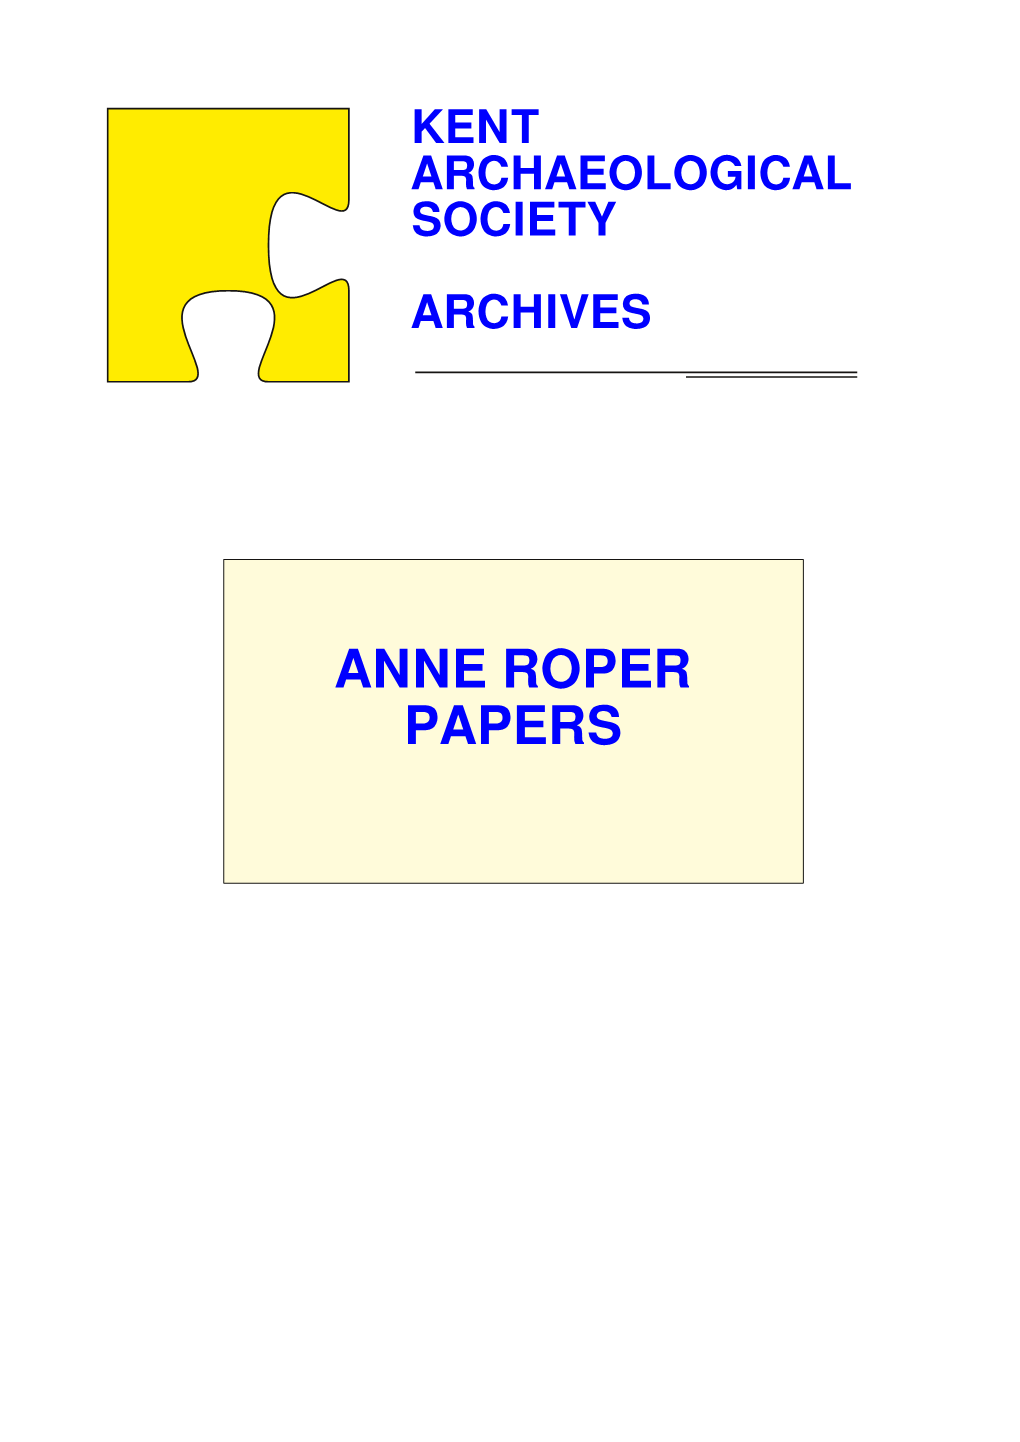 ANNE ROPER PAPERS Anne Roper Papers